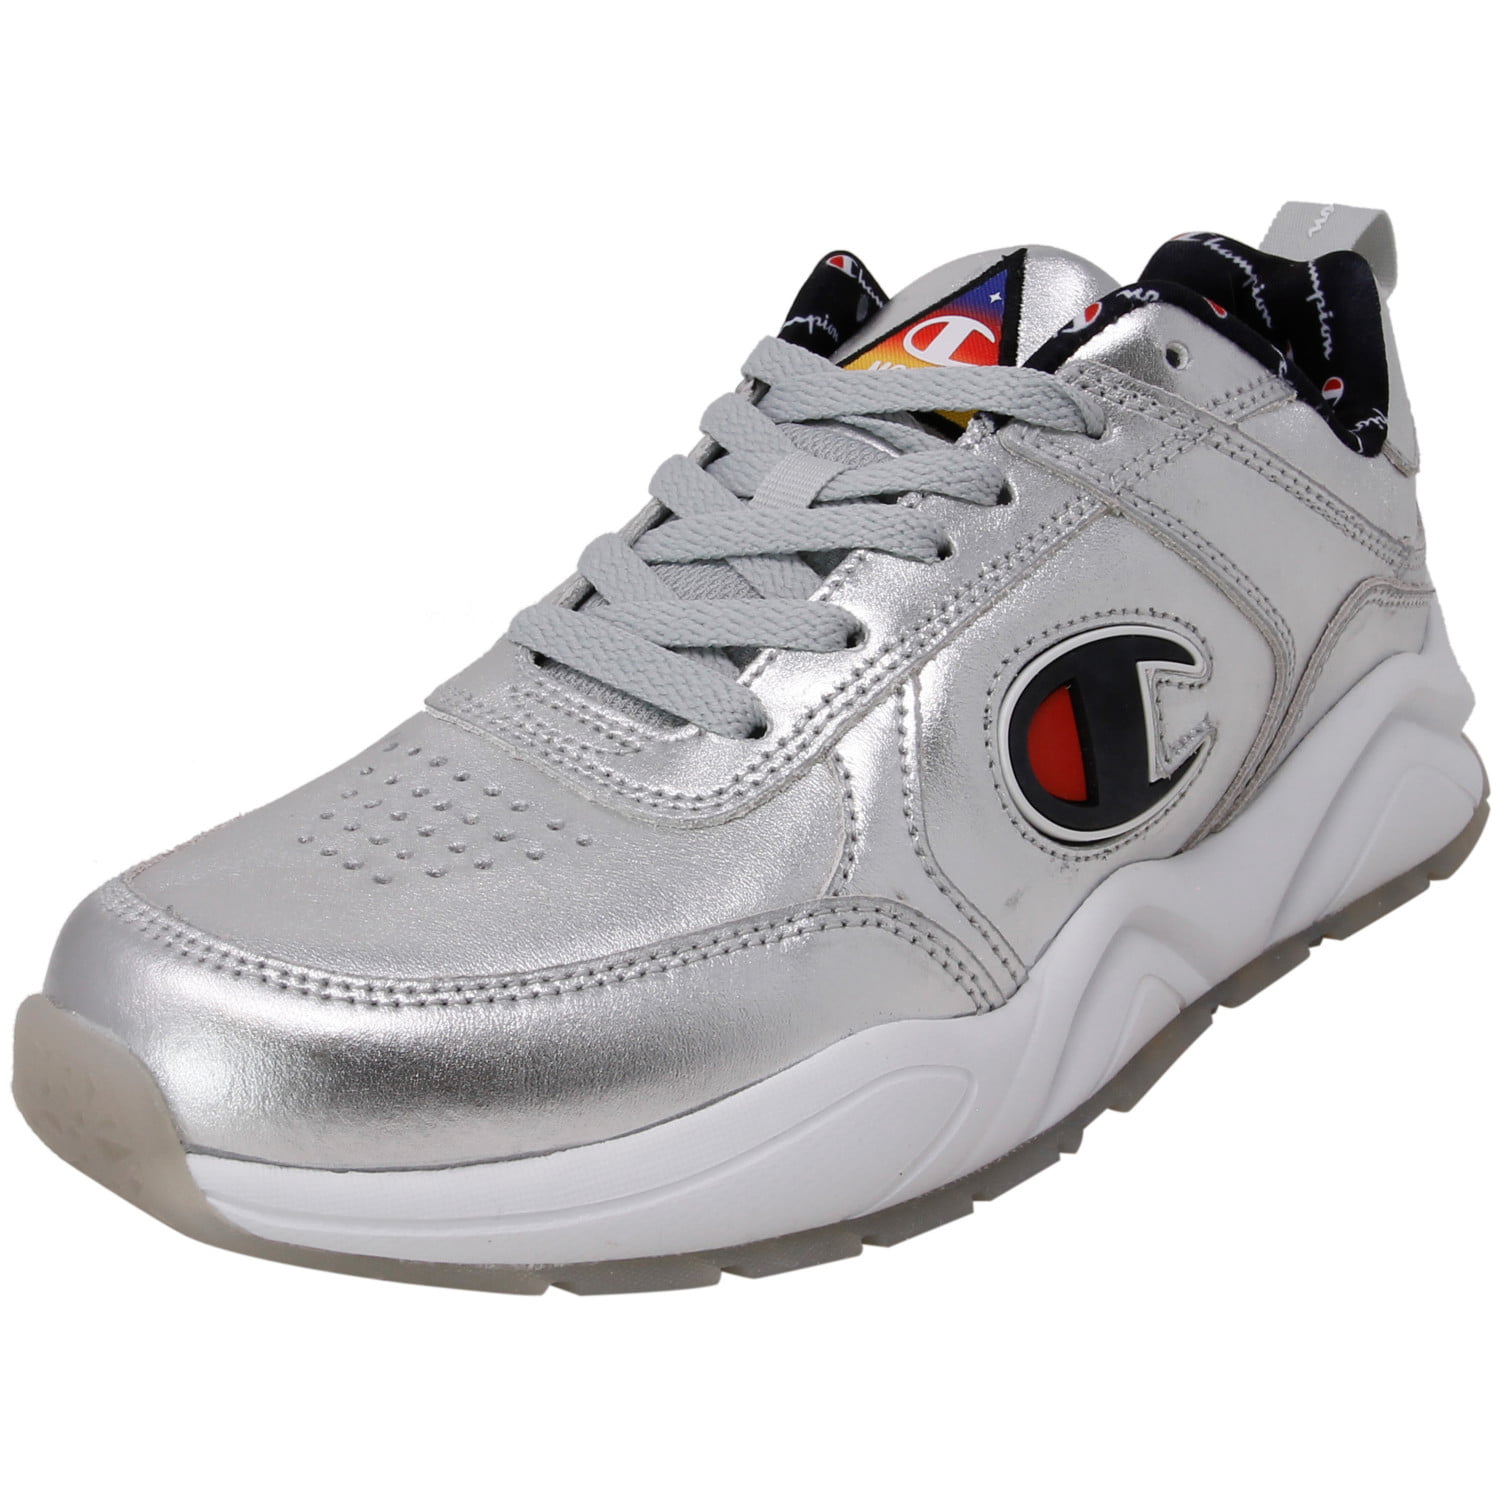 champion ankle shoes